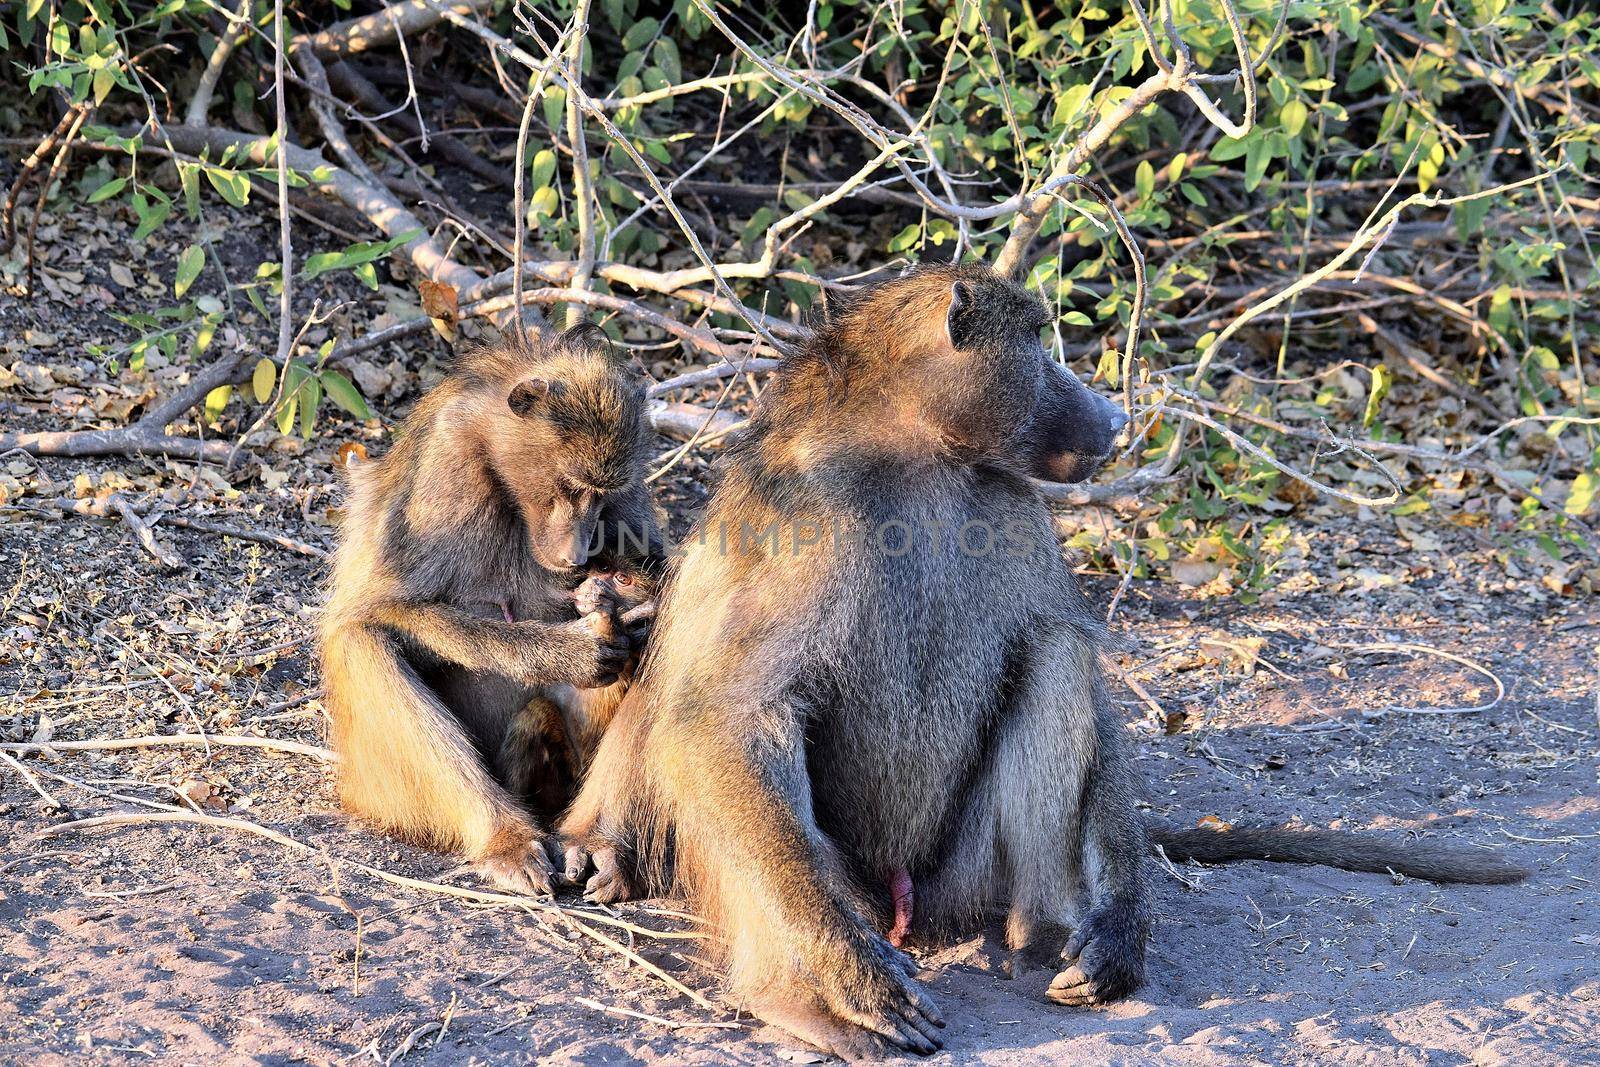 A group of baboons grooming themselves in Chobe National Park, Botswana